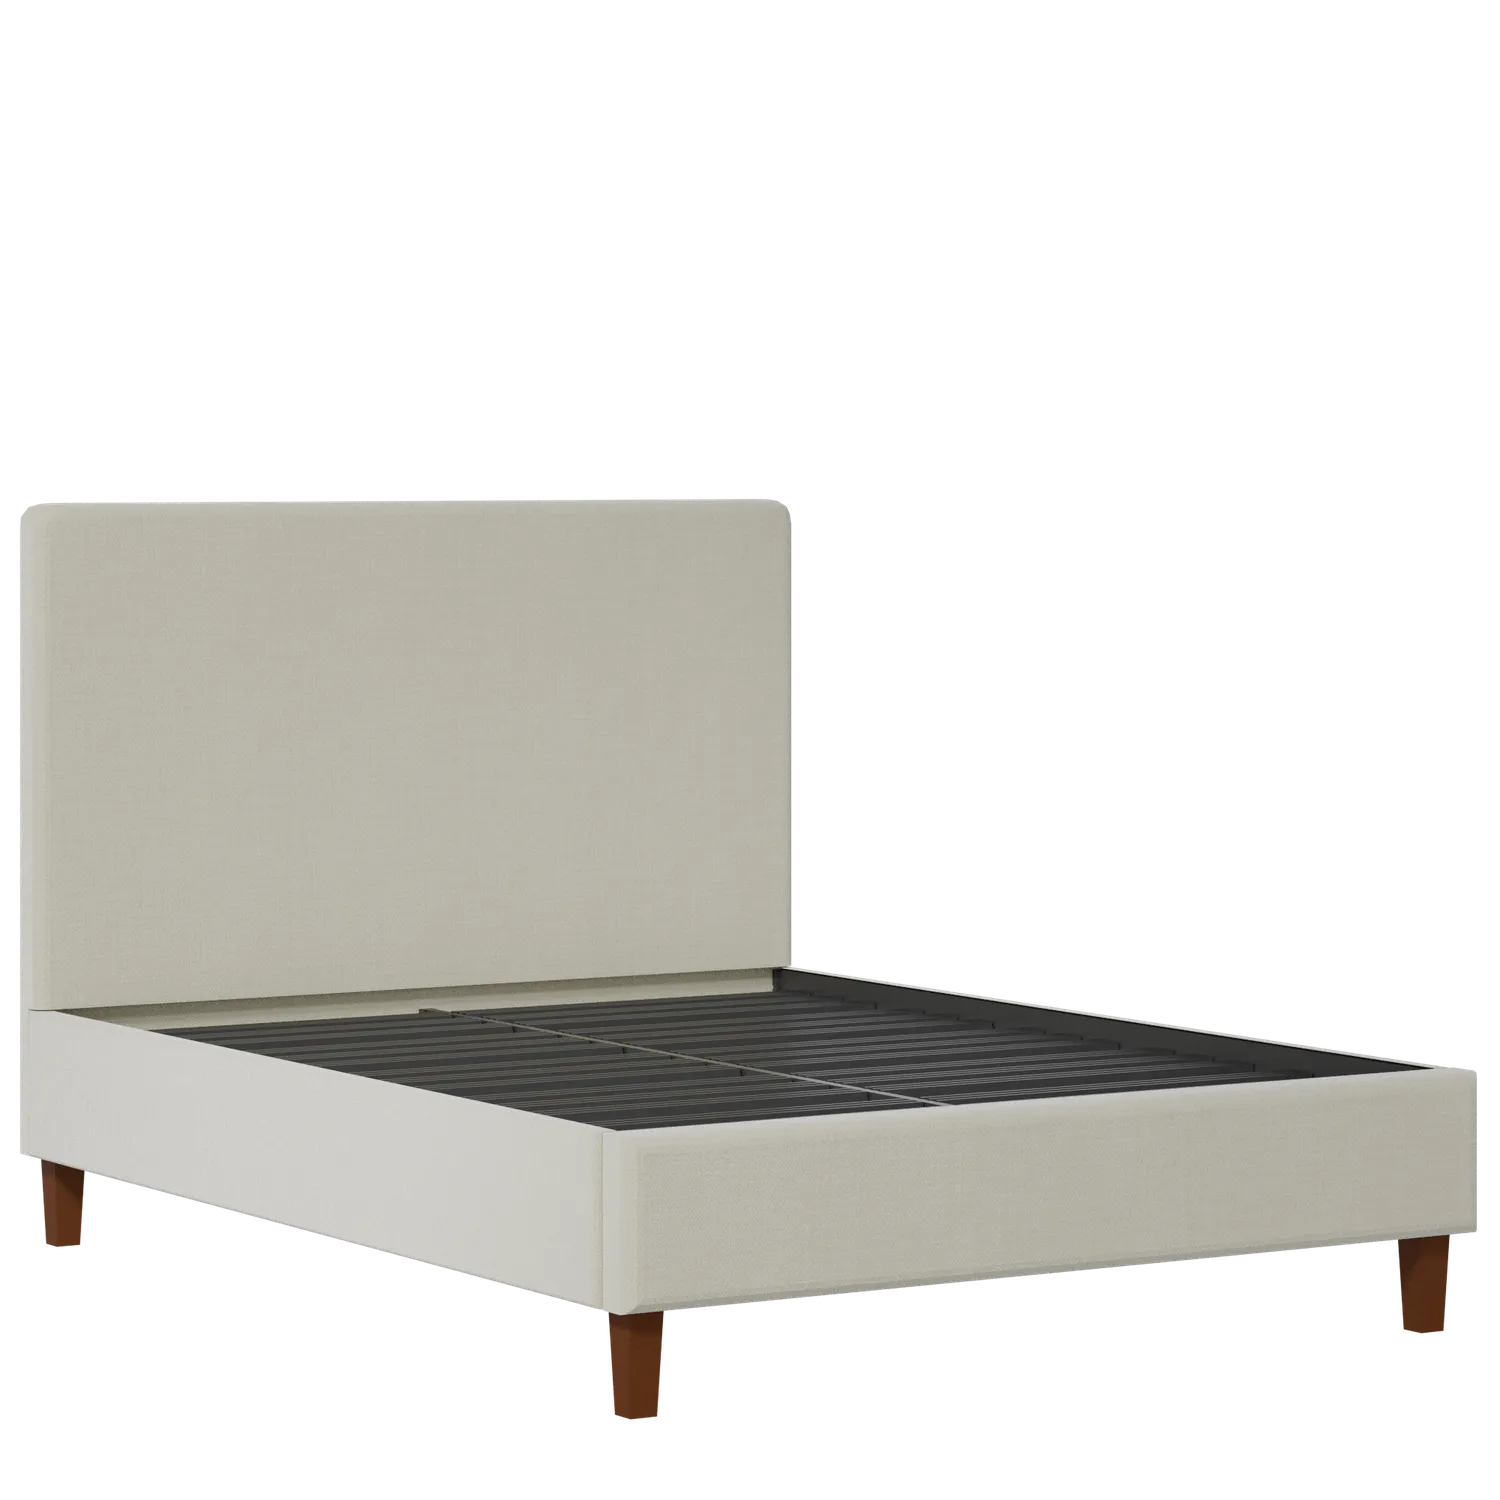 Porto Slim upholstered bed in oatmeal fabric